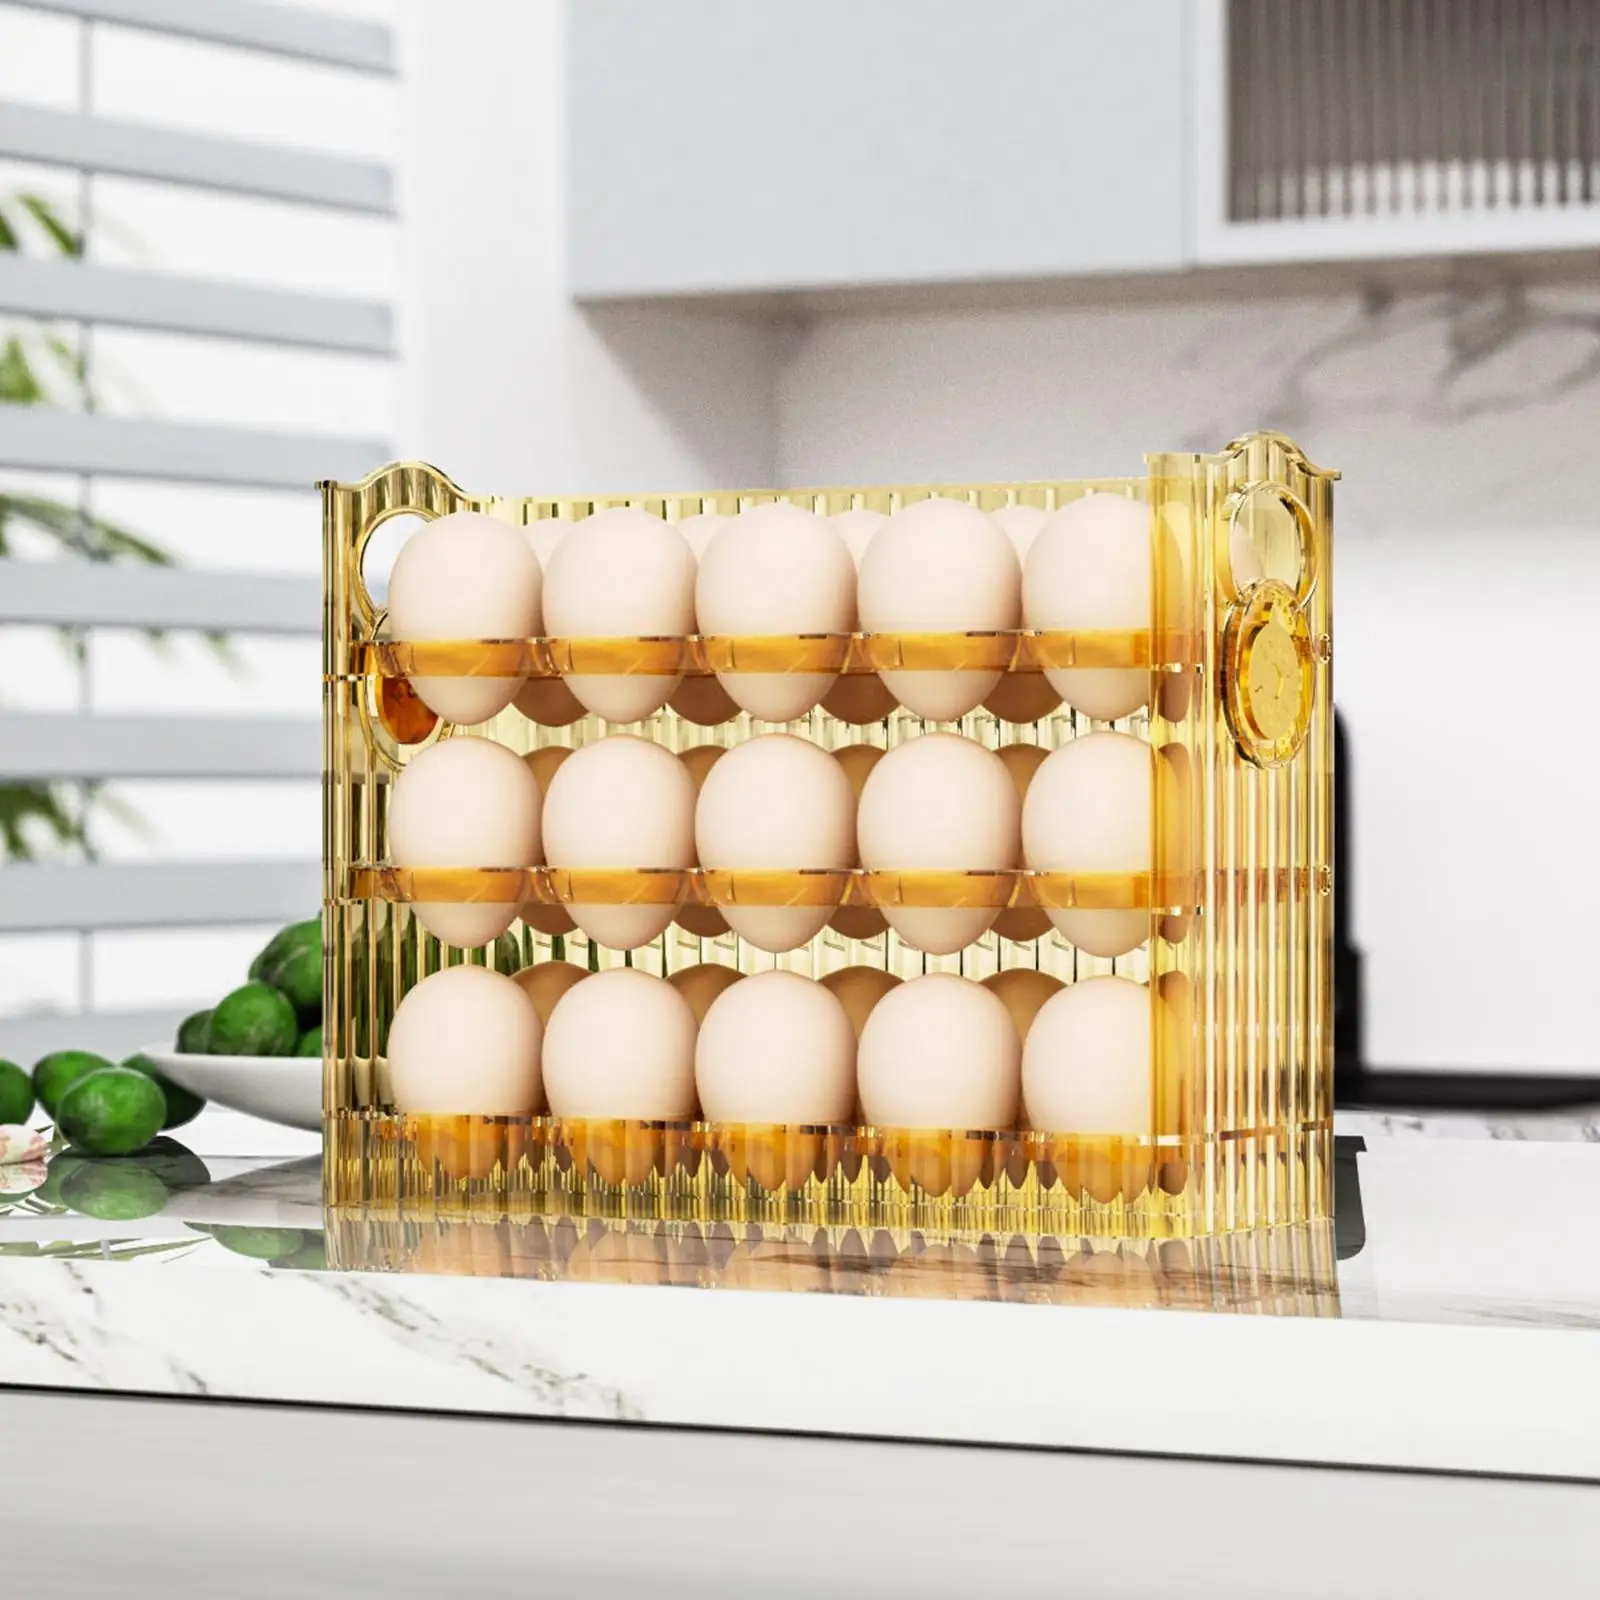 30 Grid Egg Holder, 3 Layer Egg Storage Container, Egg Tray Storage Box for Kitchen Fridge and Table